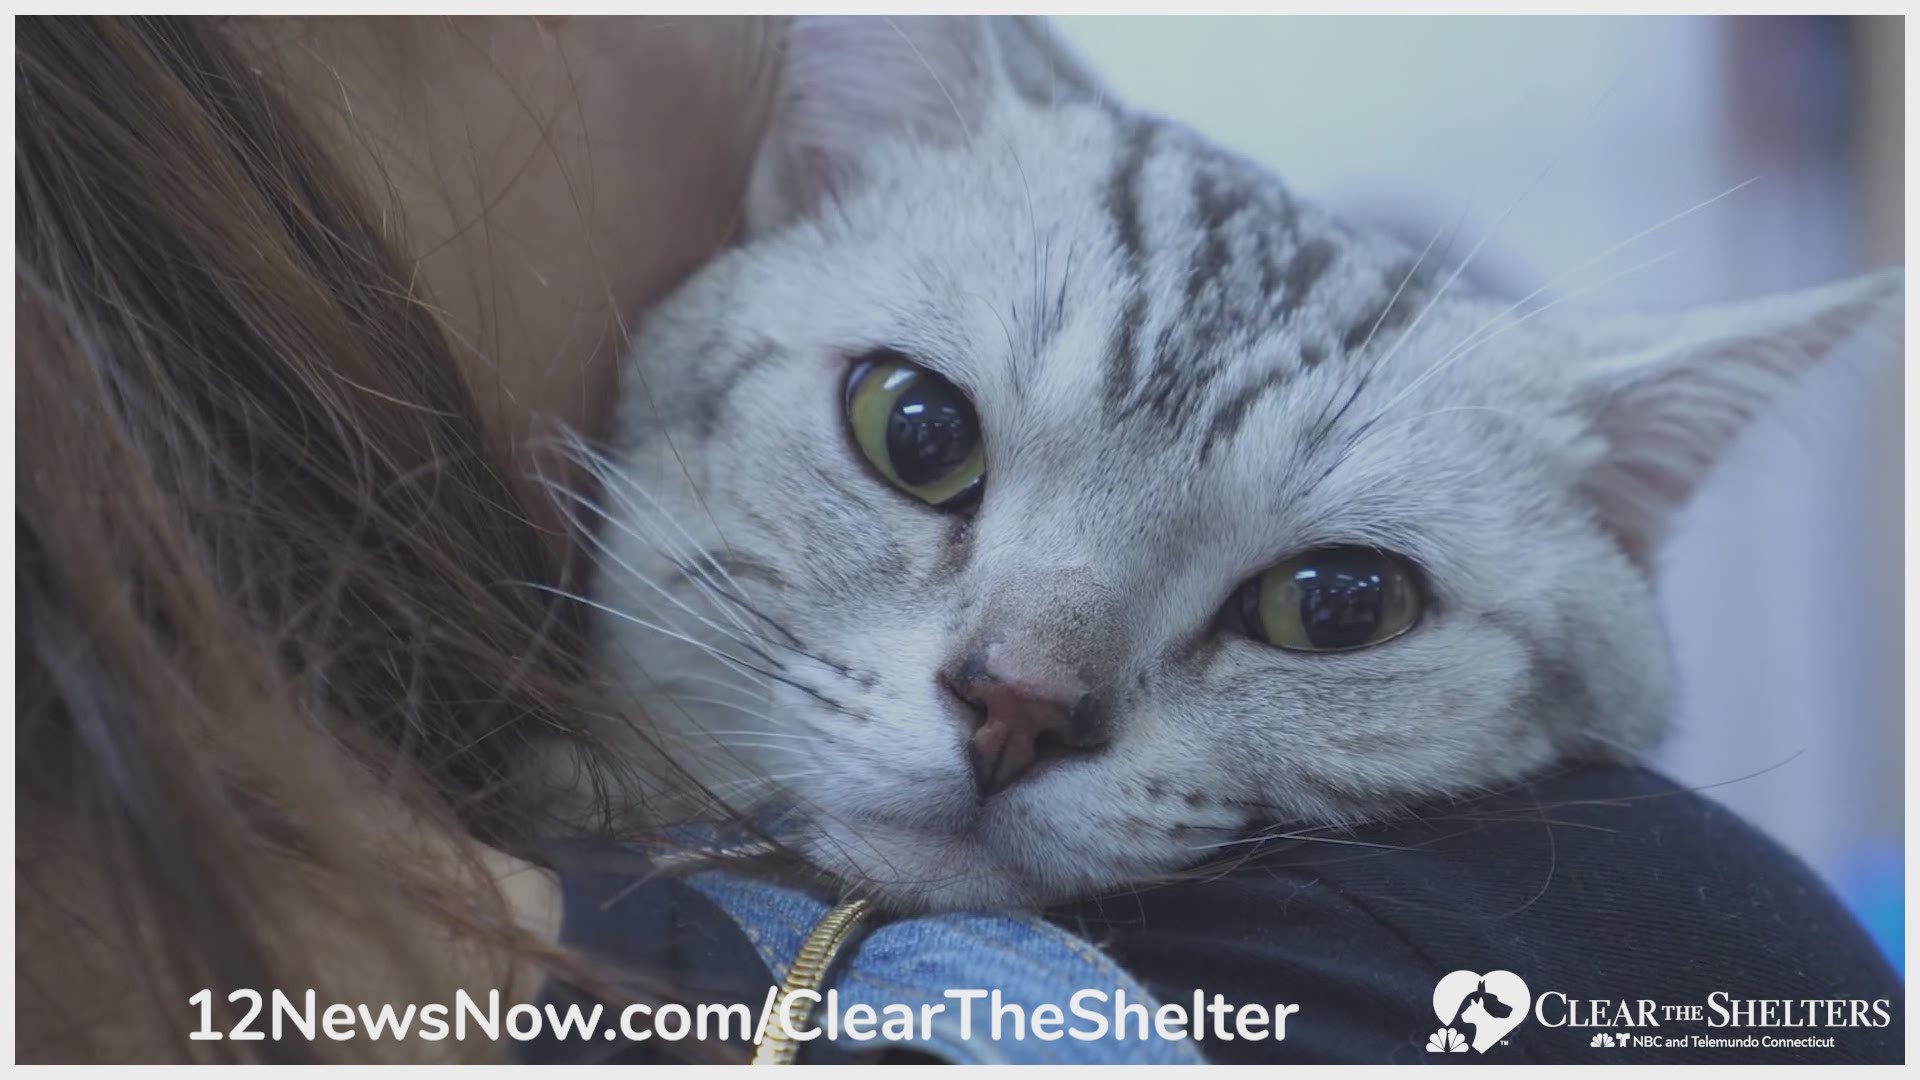 12News is joining NBC and Telemundo stations across the country to team up with shelters nationwide in August 2020 for the sixth annual Clear the Shelters drive.